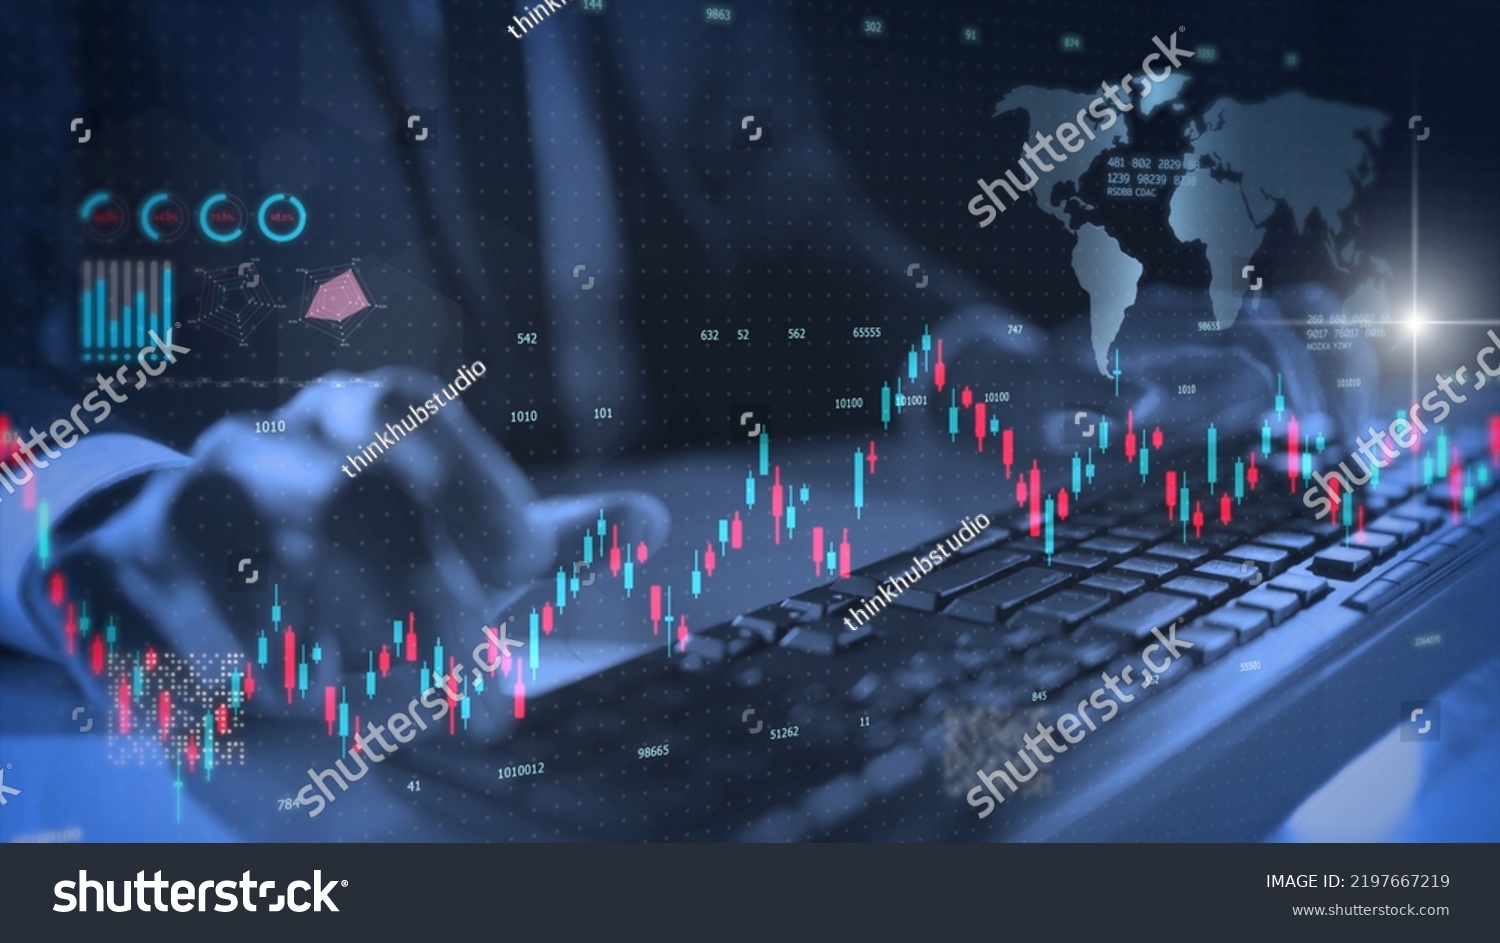 Stock exchange market economy financial dark theme, global business investment. Trader hand close up typing, trading stock market, candle stick graph chart. #2197667219